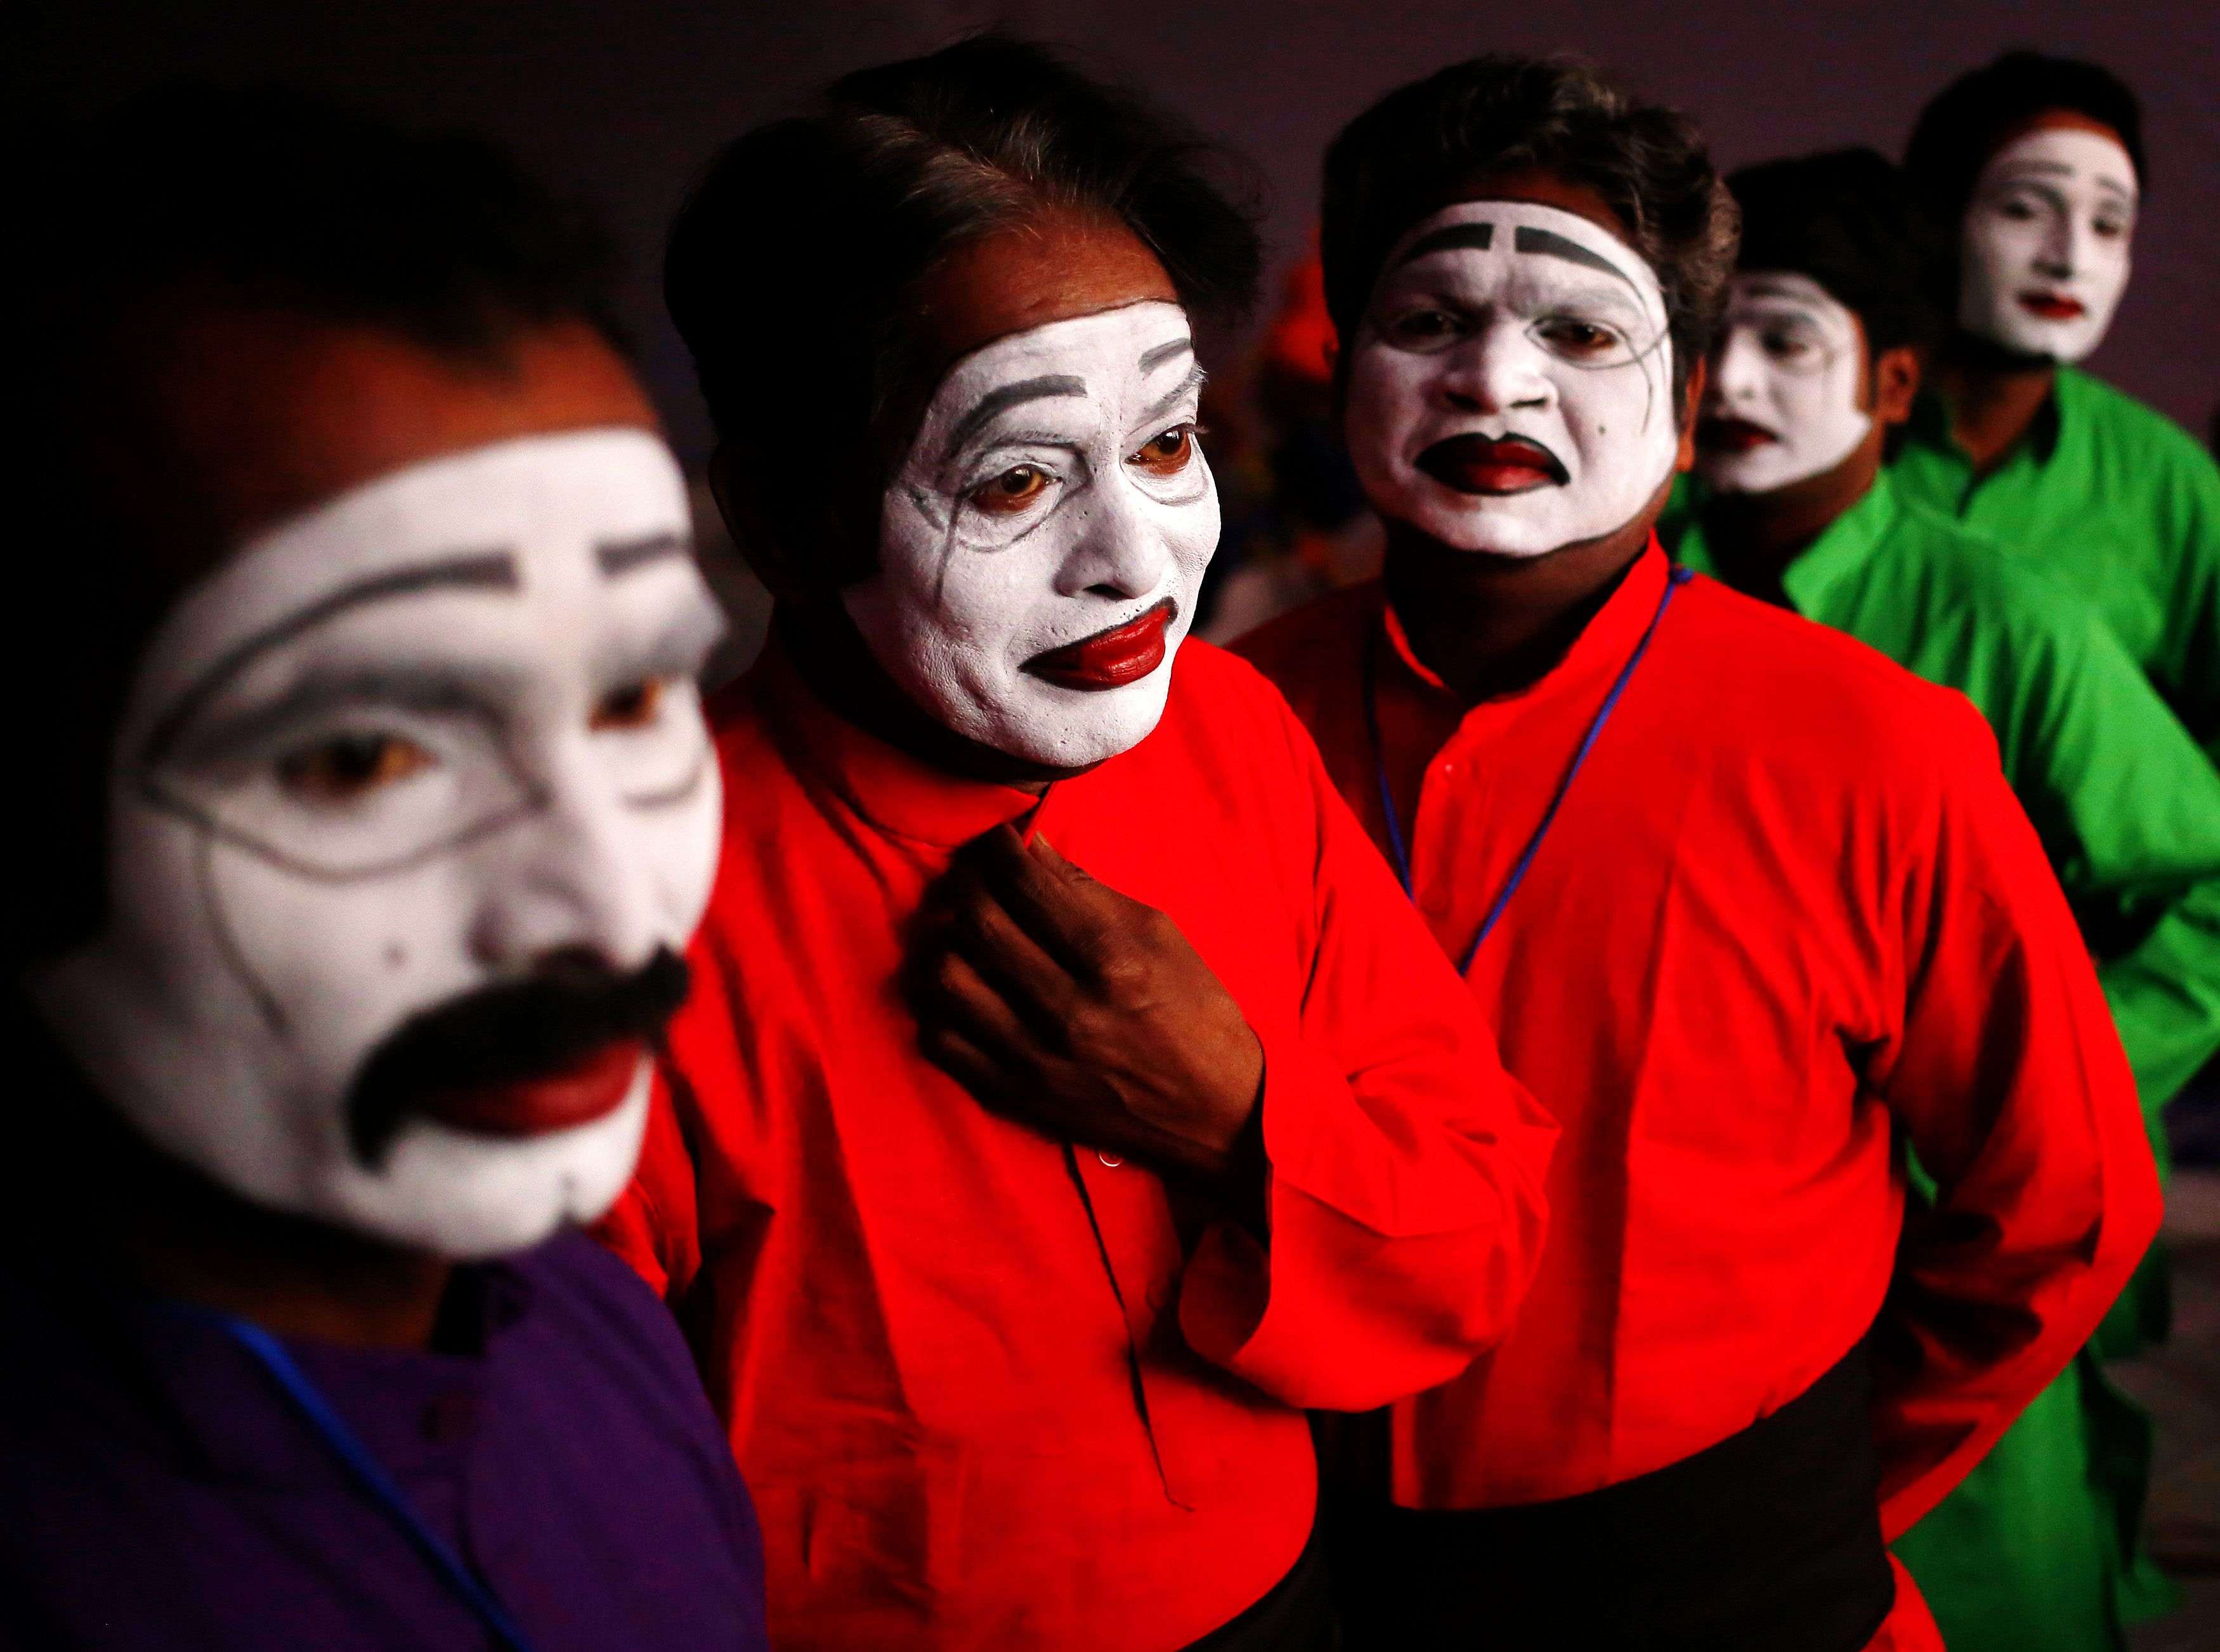 Artists wait for their turn to perform during a media preview for the Republic Day parade in New Delhi. (REUTERS/Anindito Mukherjee)